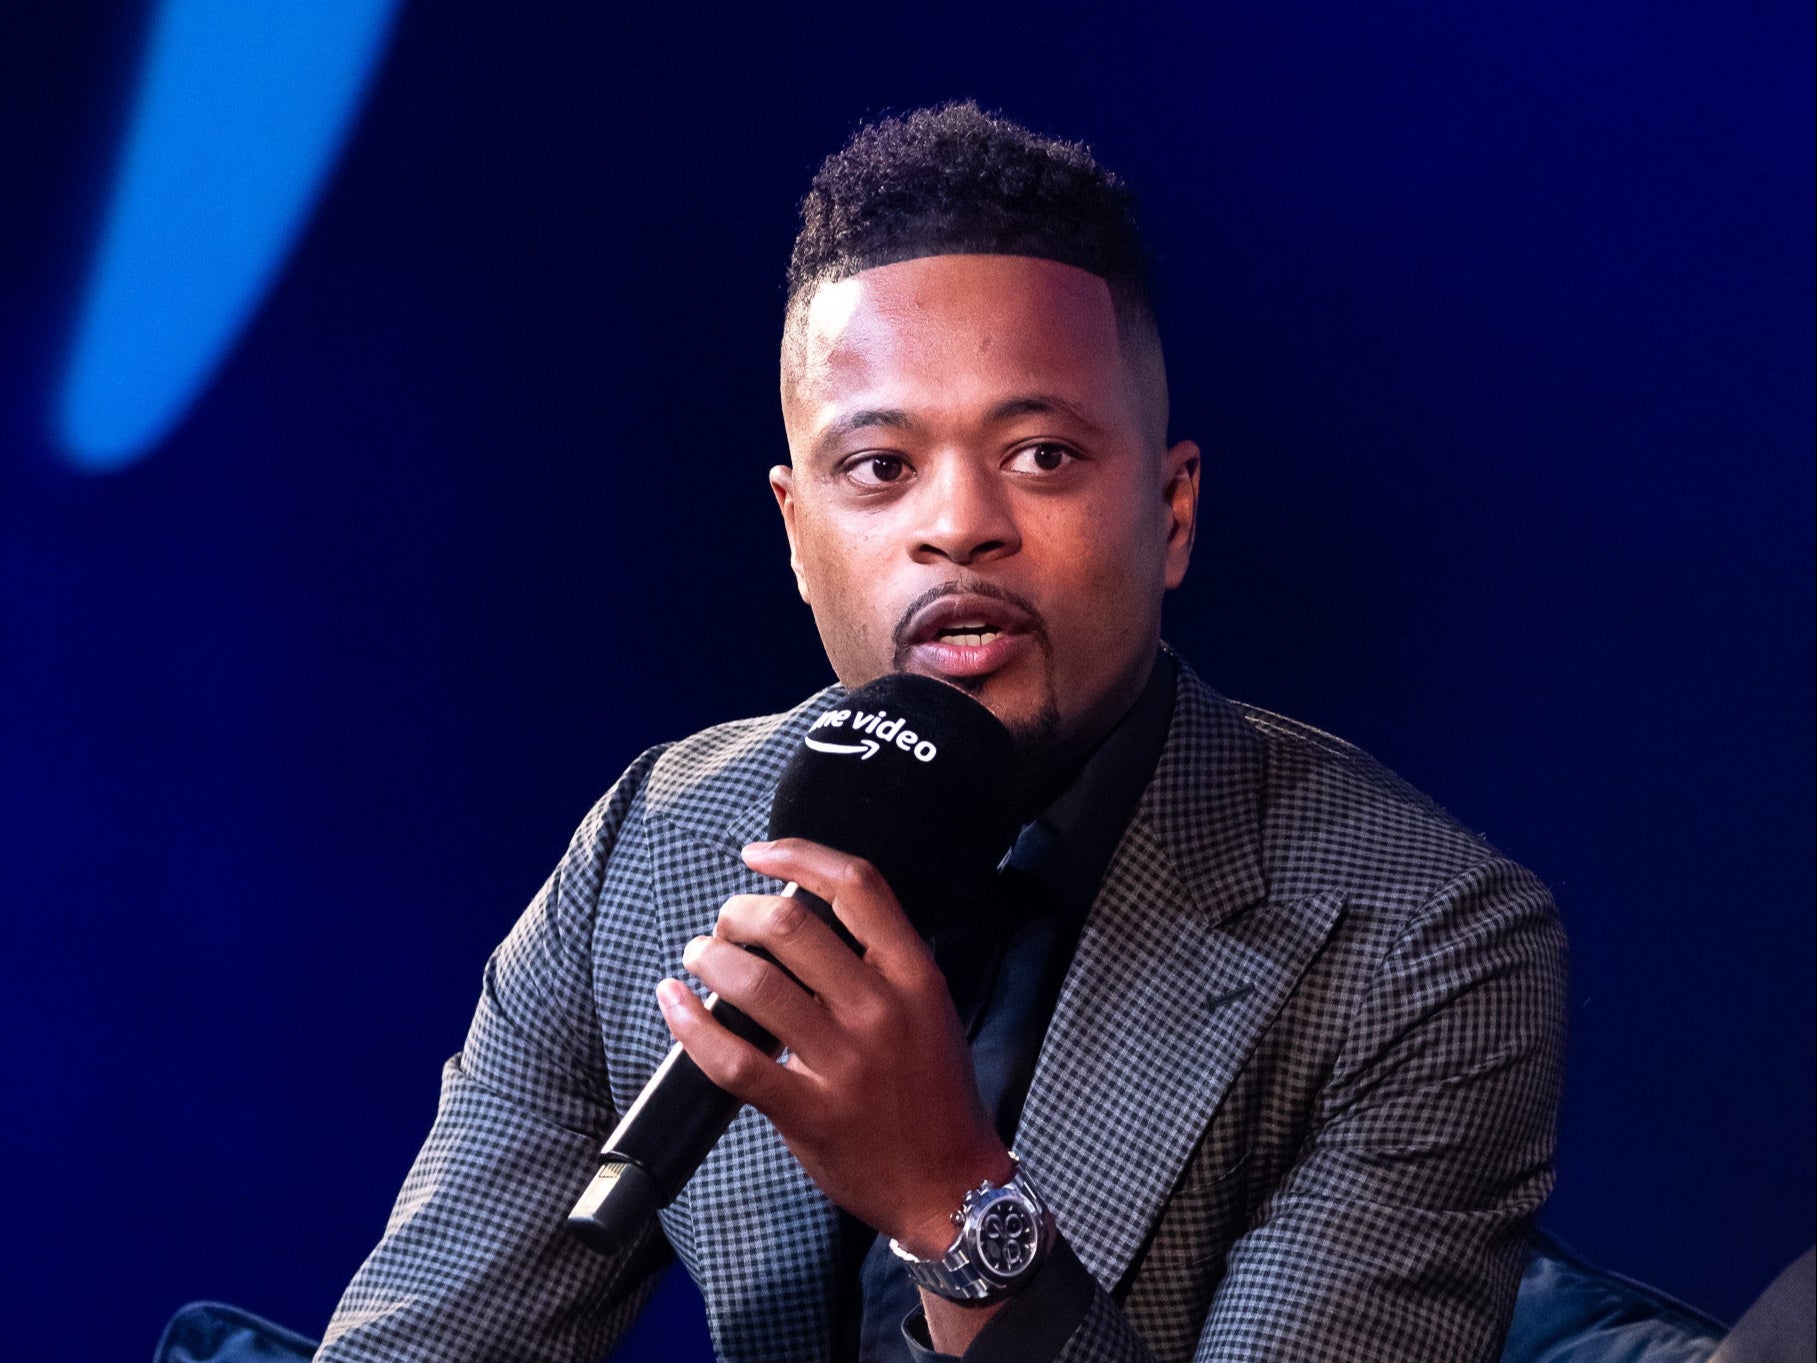 Patrice Evra: ‘I want kids to be protected by the law’